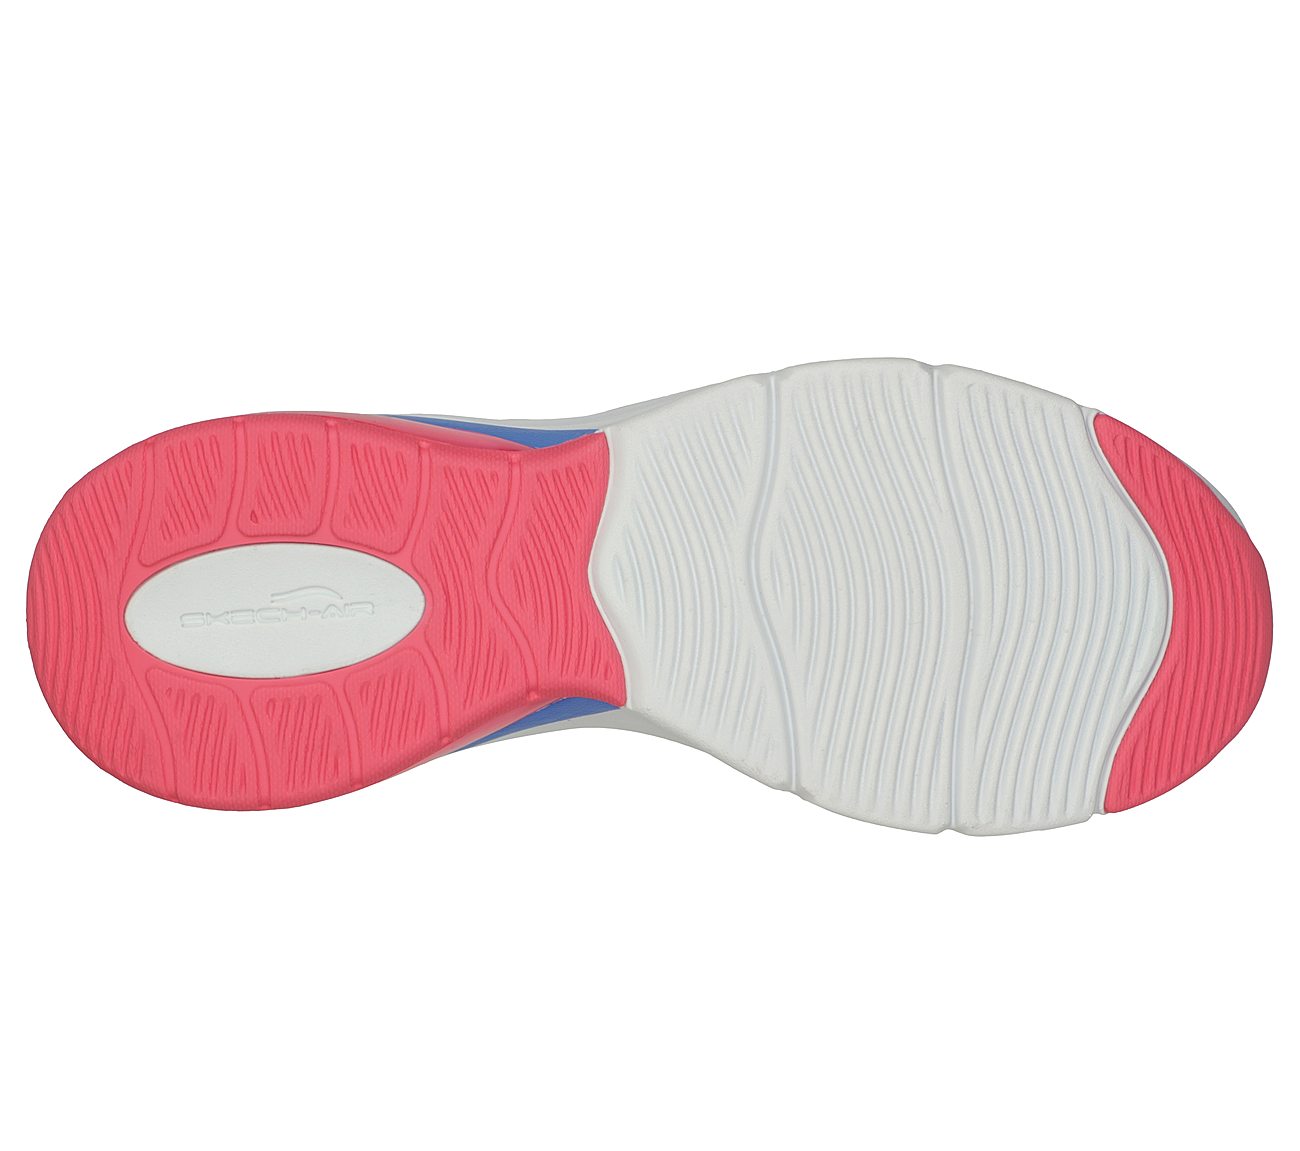 SKECH-AIR EXTREME 2.0-CLASSIC, WHITE BLACK PINK Footwear Bottom View